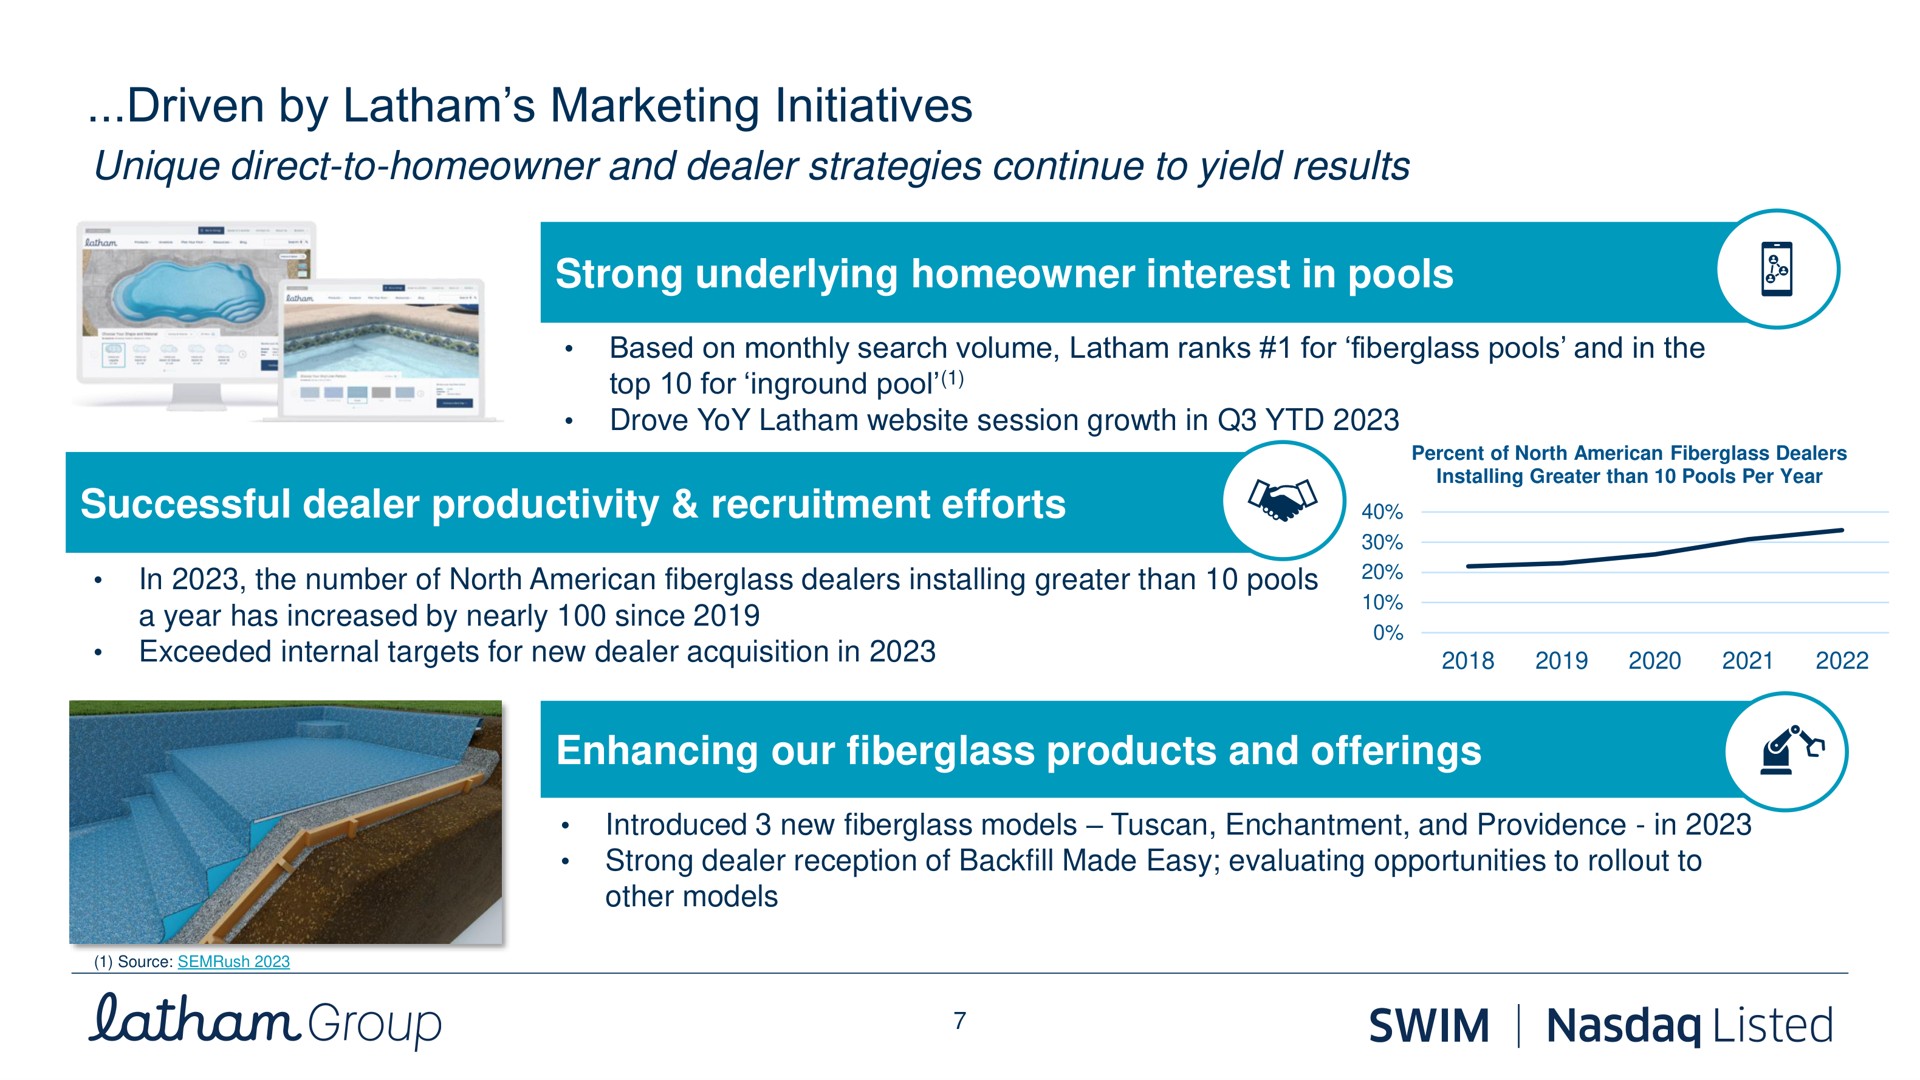 driven by marketing initiatives unique direct to homeowner and dealer strategies continue to yield results strong underlying homeowner interest in pools successful dealer productivity recruitment efforts enhancing our products and offerings croup swim listed | Latham Pool Company